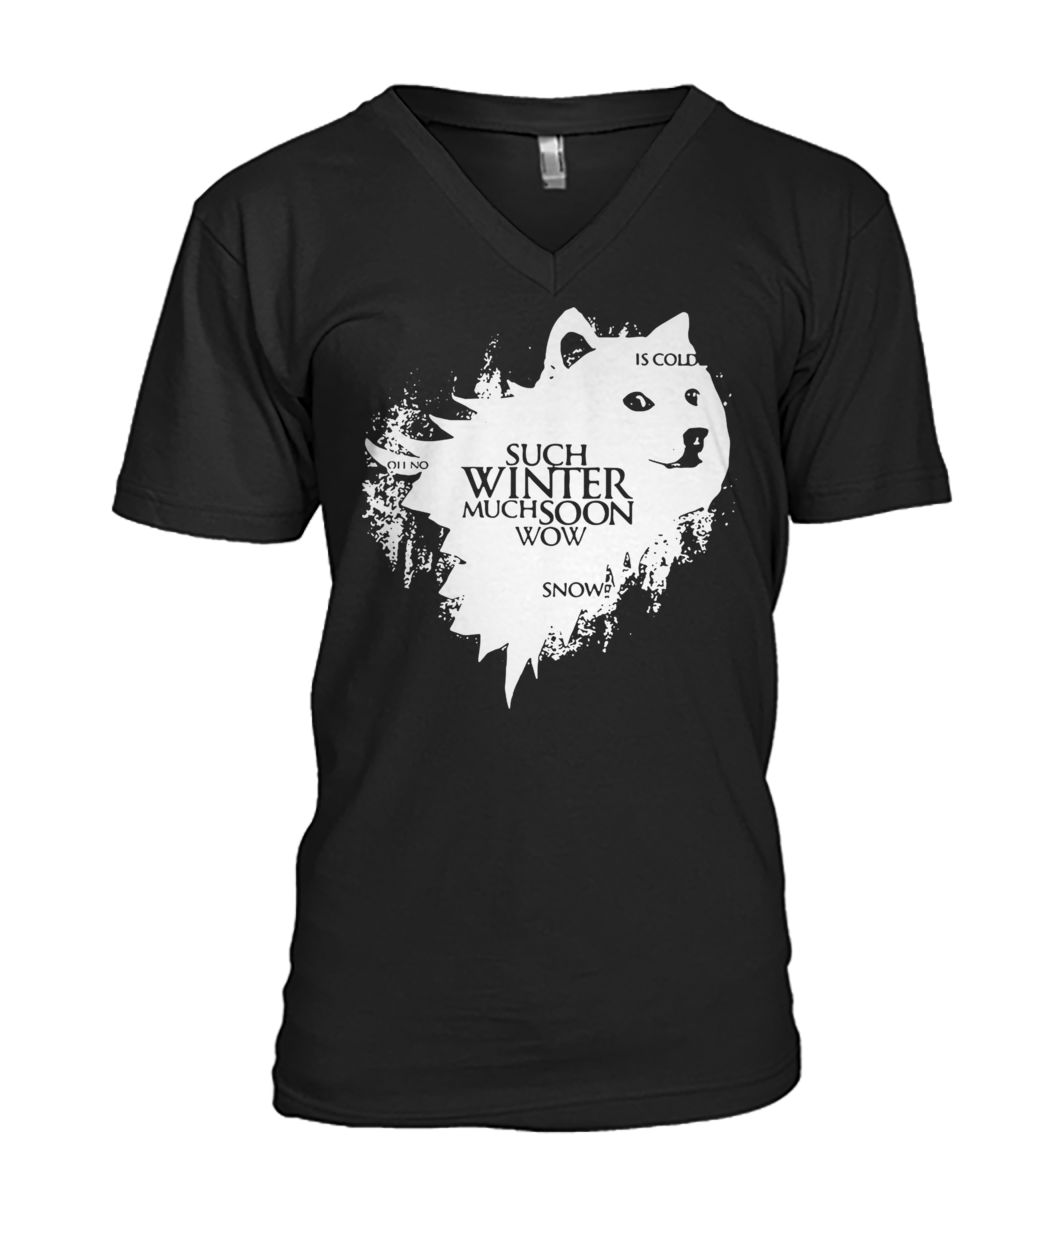 Game of thrones doge oh no such winter much soon wow snow is cold mens v-neck